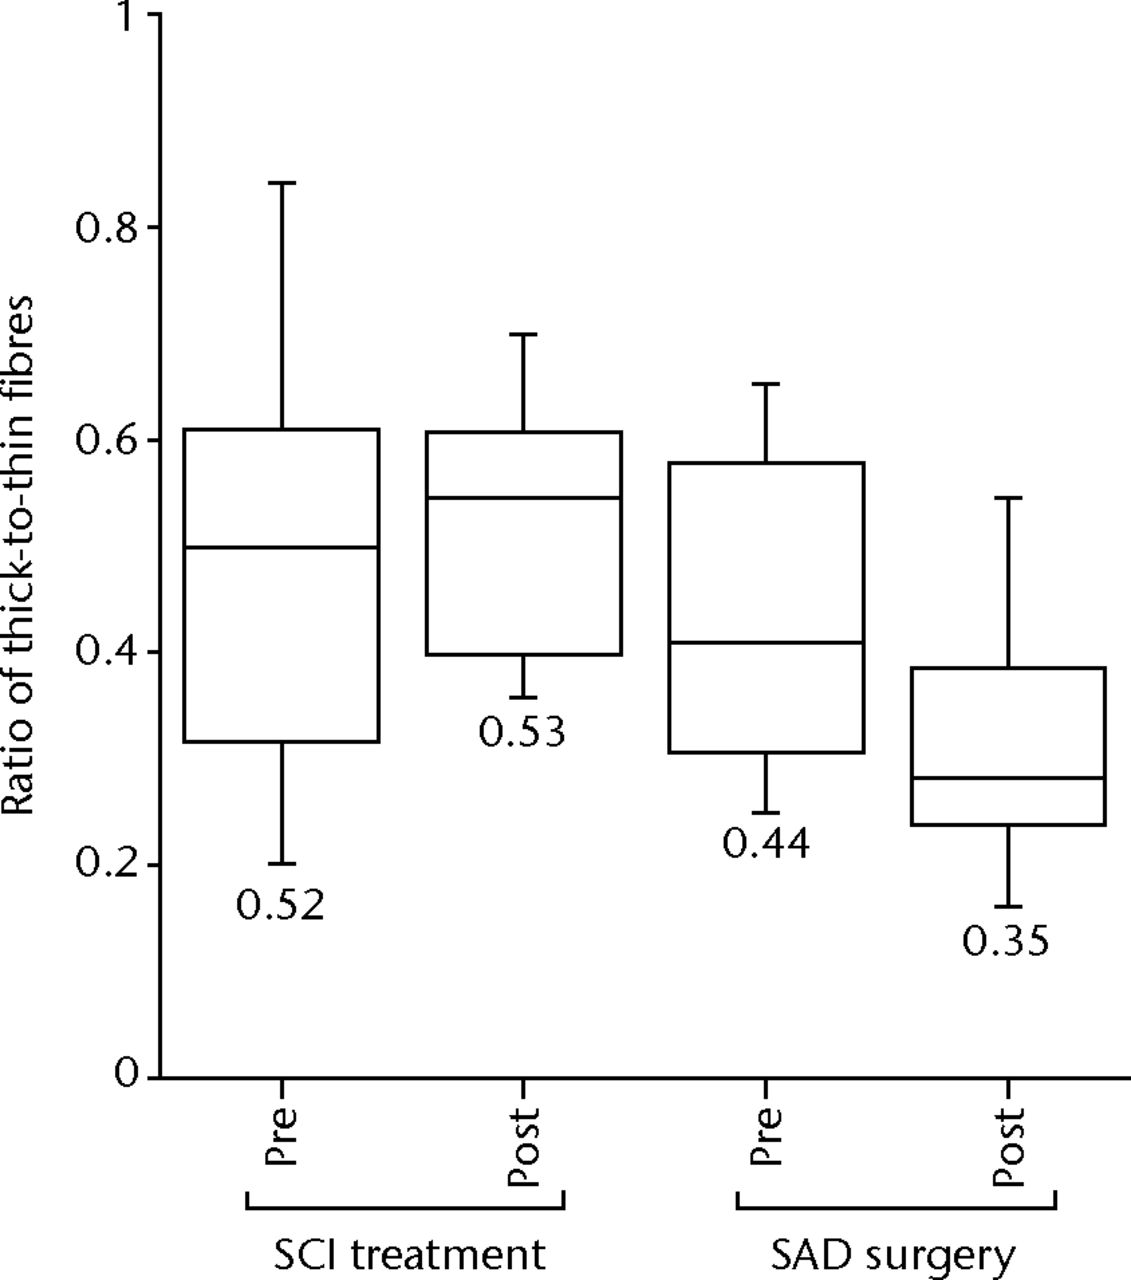 Fig. 9 
          Ratio of thick-to-thin fibres measurements
for partial tear groups before and after subachromial corticosteroid
injections (SCI) and subacromial decompression (SAD) surgery. There
are no significant changes in the ratio of thick-to-thin fibres
after SCI-treatment or after SAD surgery compared with the pre-treatment
measurements (p >
 0.05).
        